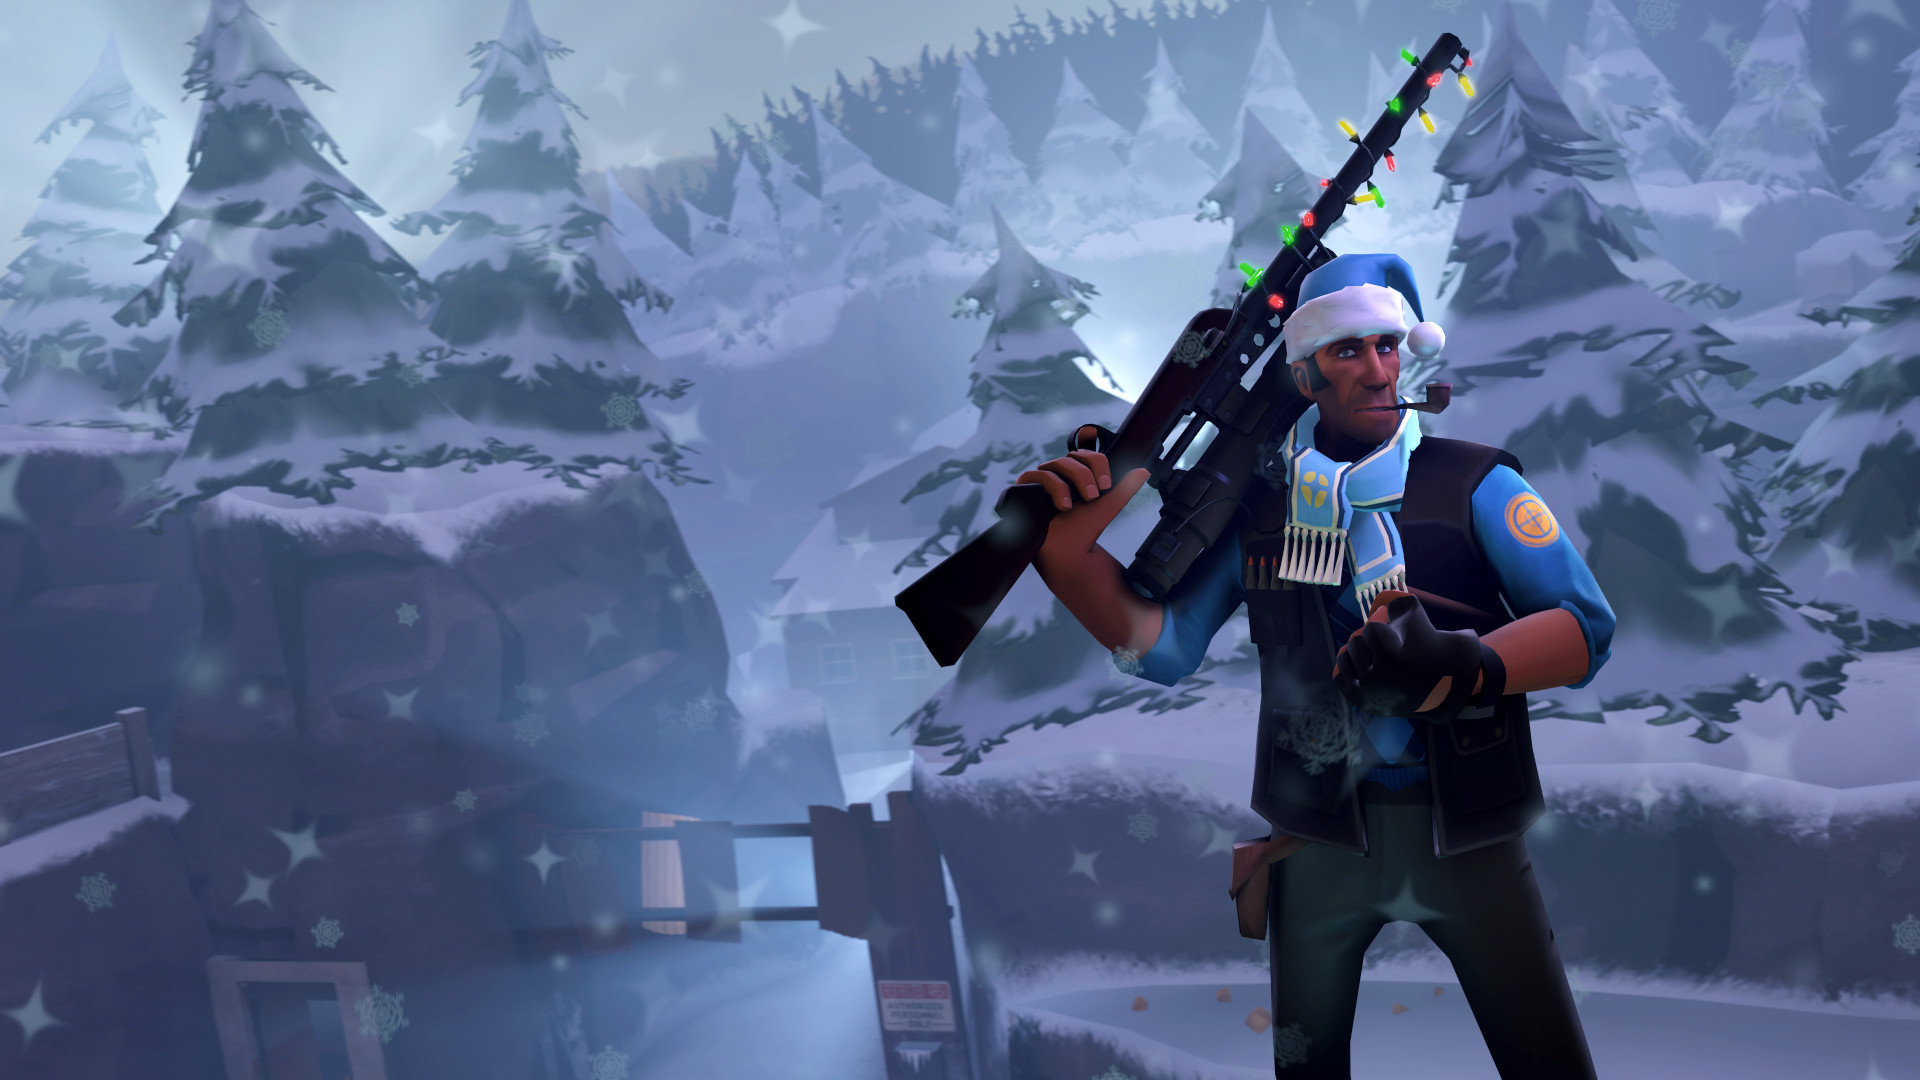 1920x1080 ... Team Fortress 2 - Jolly Sniper in Winter Paradise by TonyC445